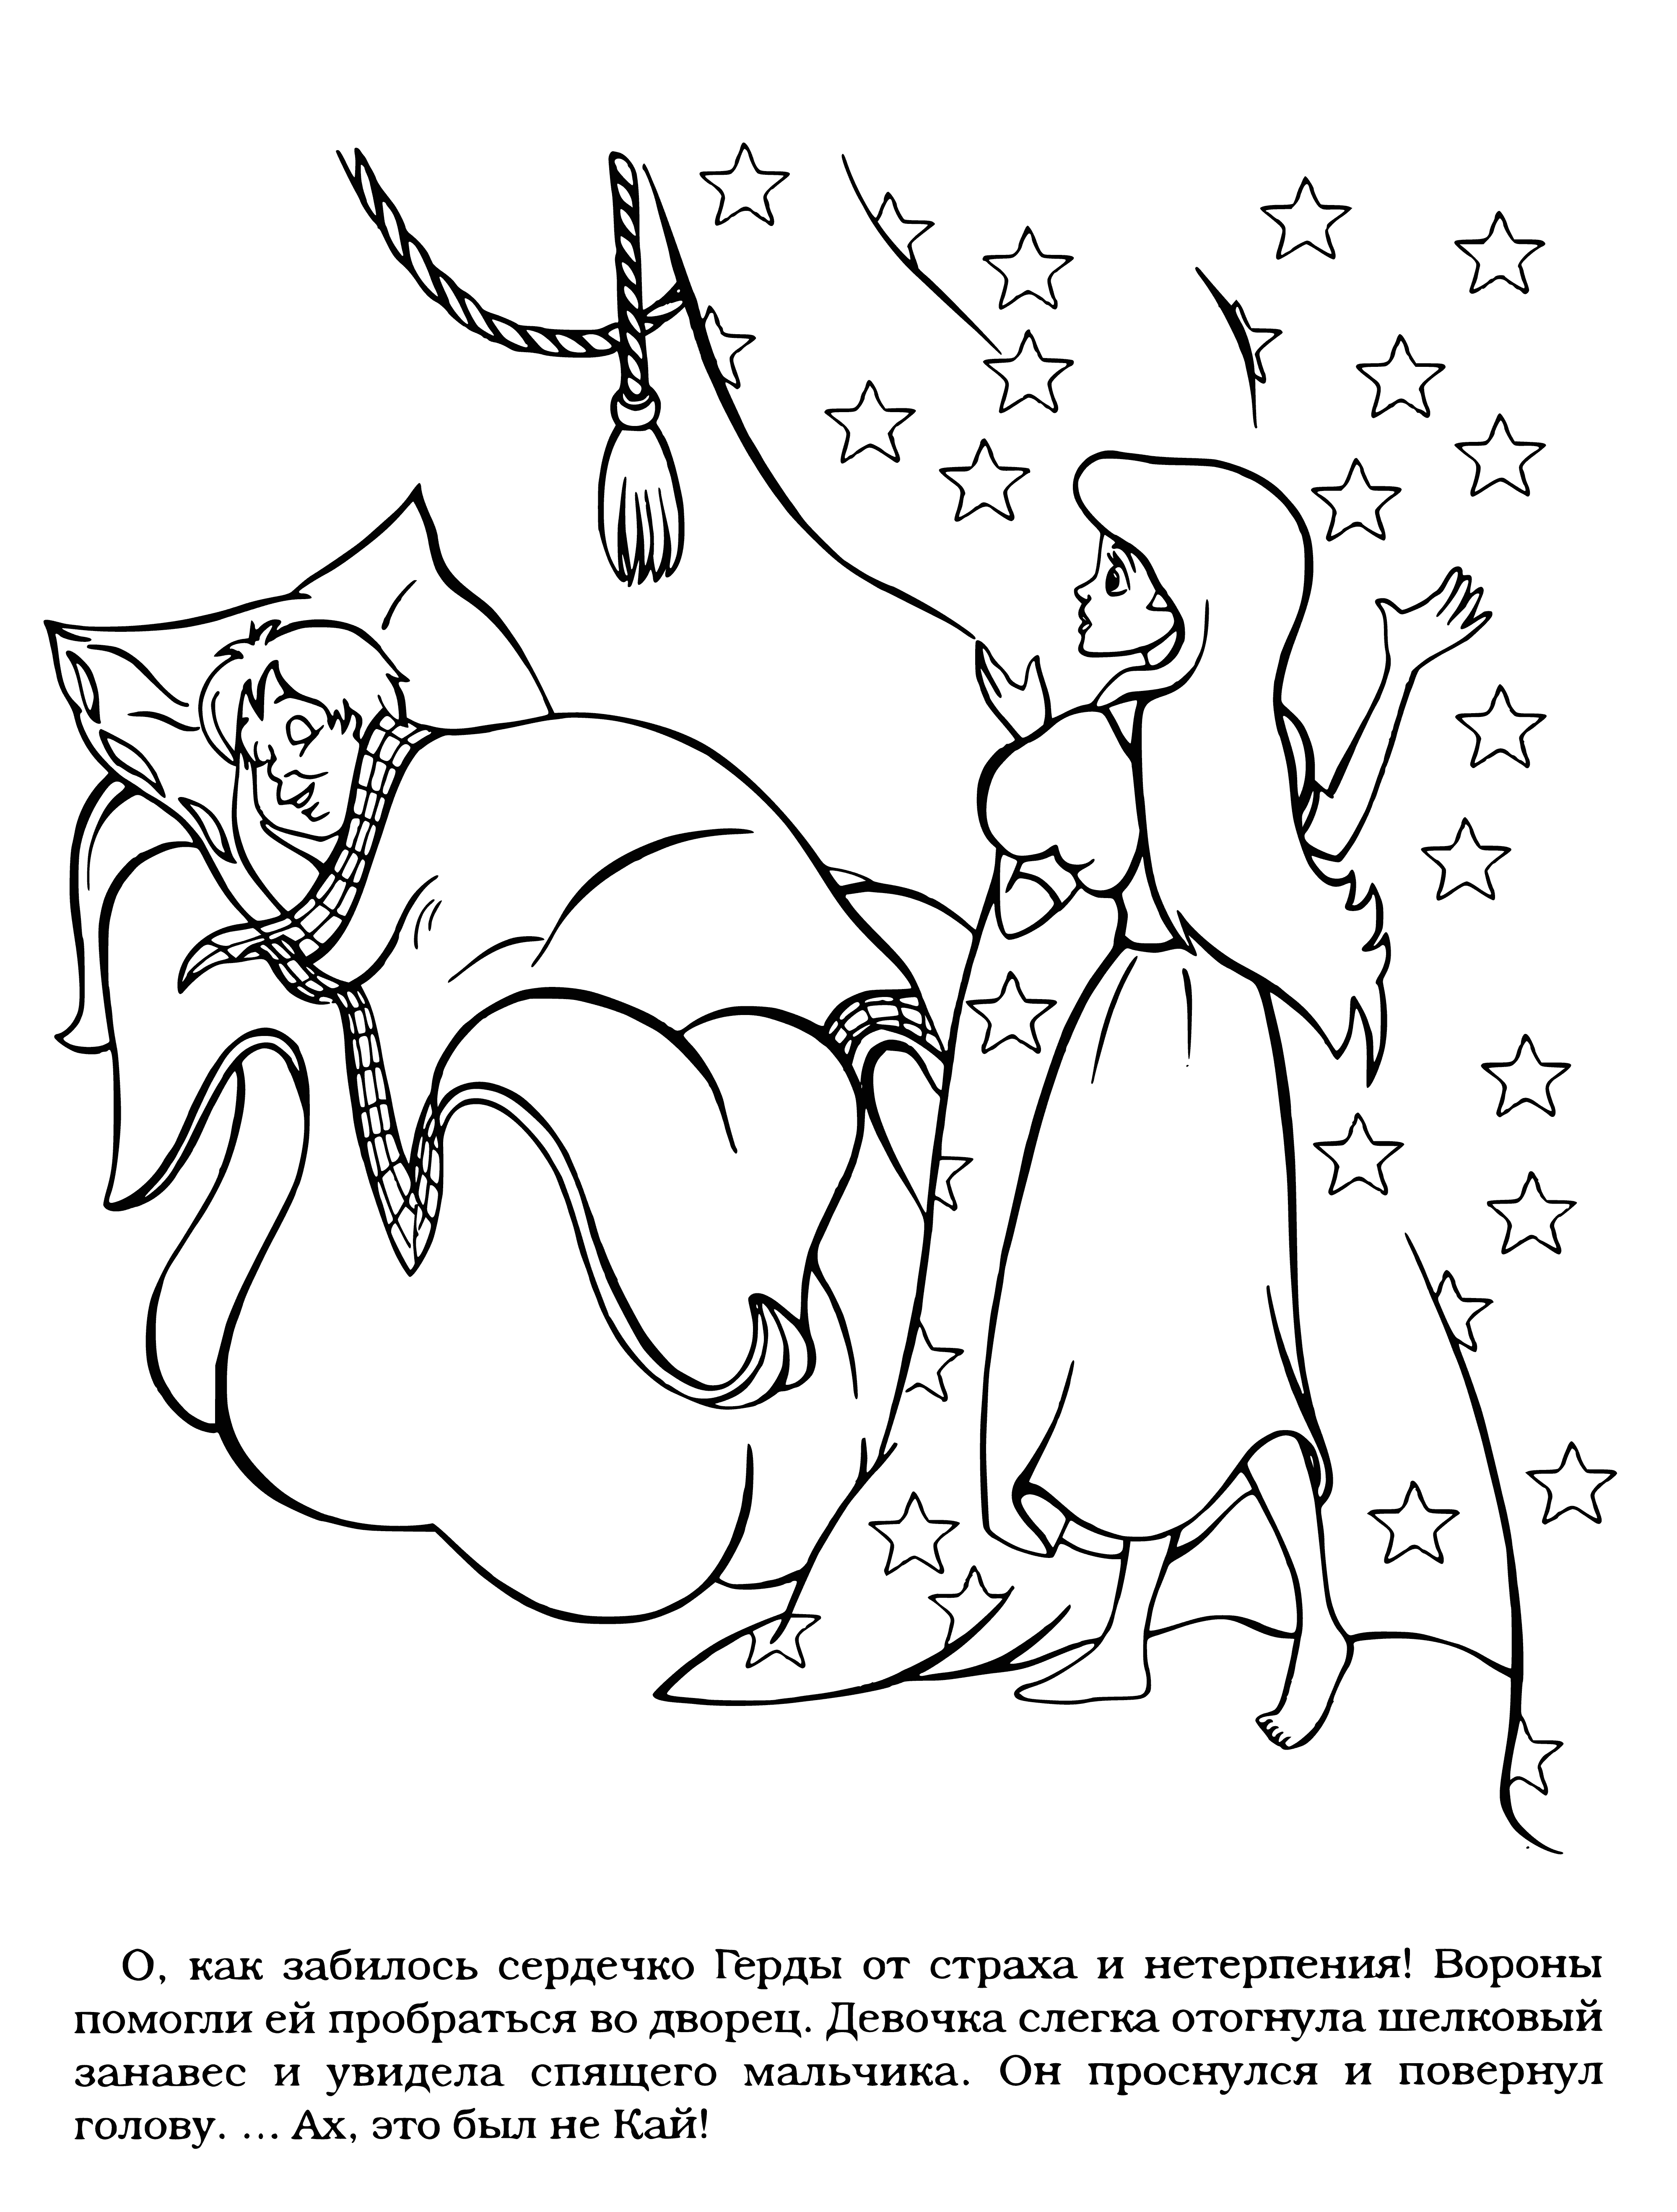 Gerda in the palace coloring page